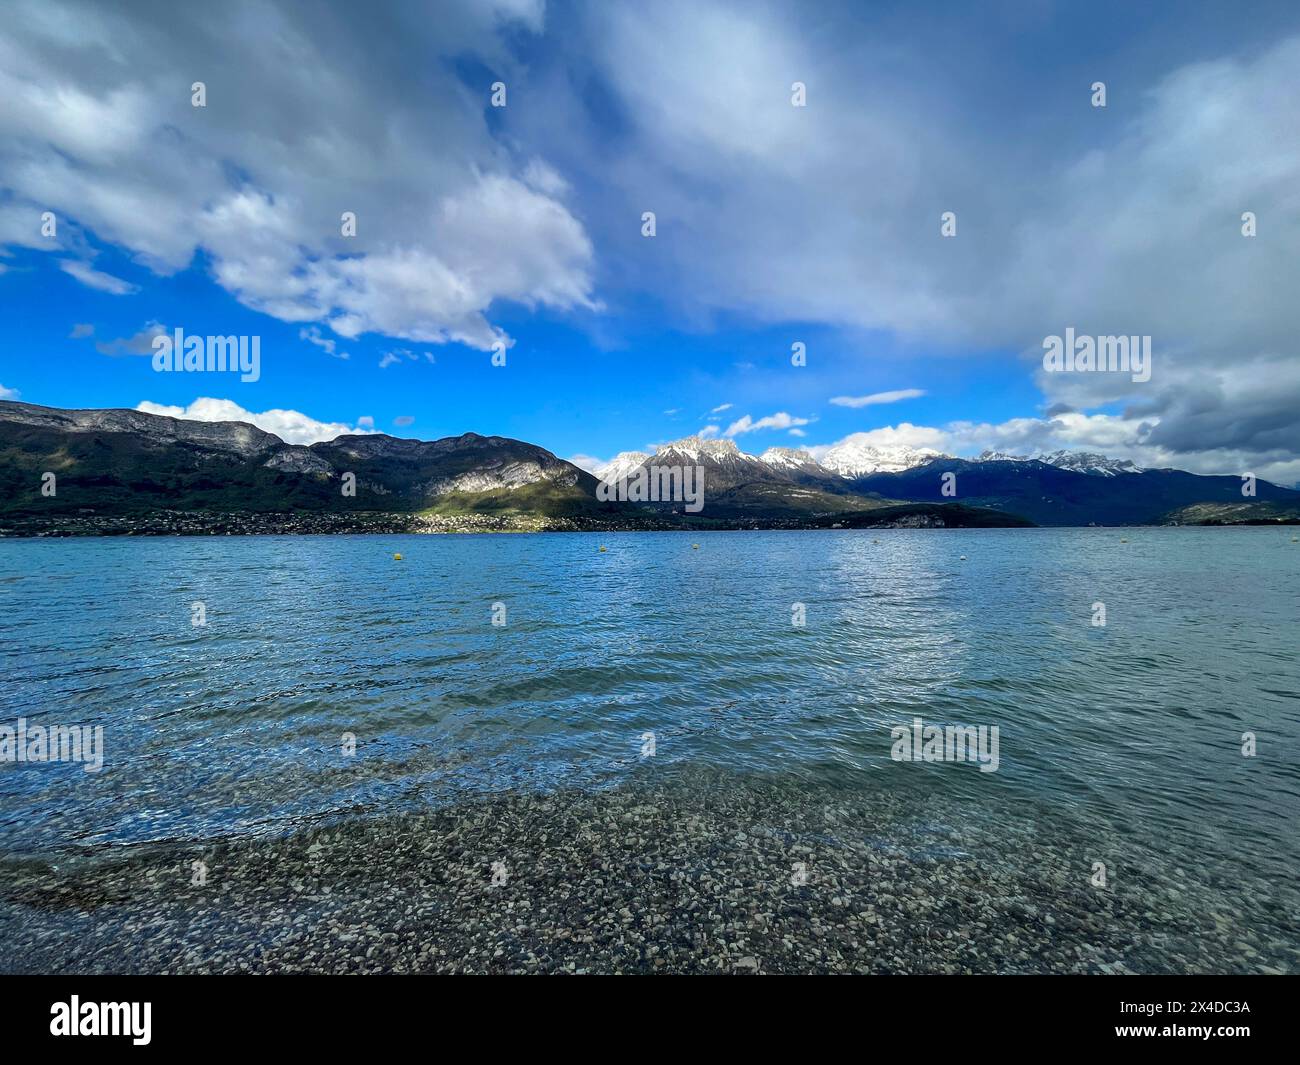 Haute-Savoie, France: Annecy lake, the second largest in France, the cleanest in Europe due to strict environmental regulations in place since 1960s Stock Photo